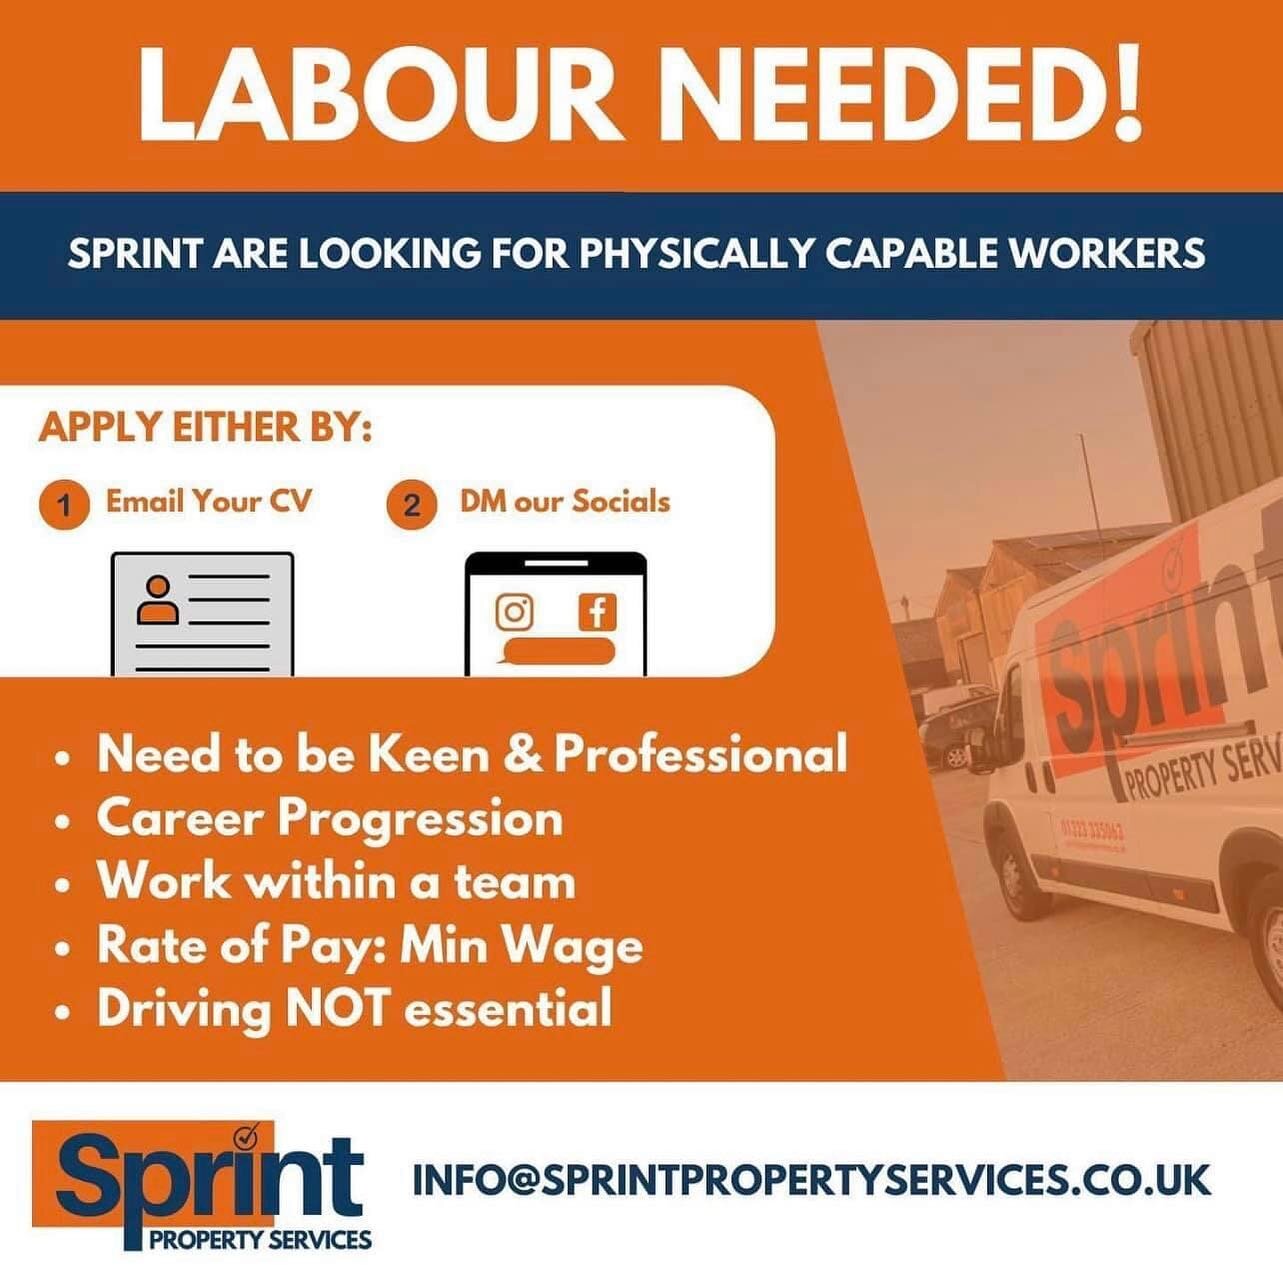 Trainee Labour NEEDED with an IMMEDIATE start. 

Are you looking for work or know someone that is? 

Trial days available this week. 

Get in touch - TODAY! 

DM or WhatsApp 07548926365